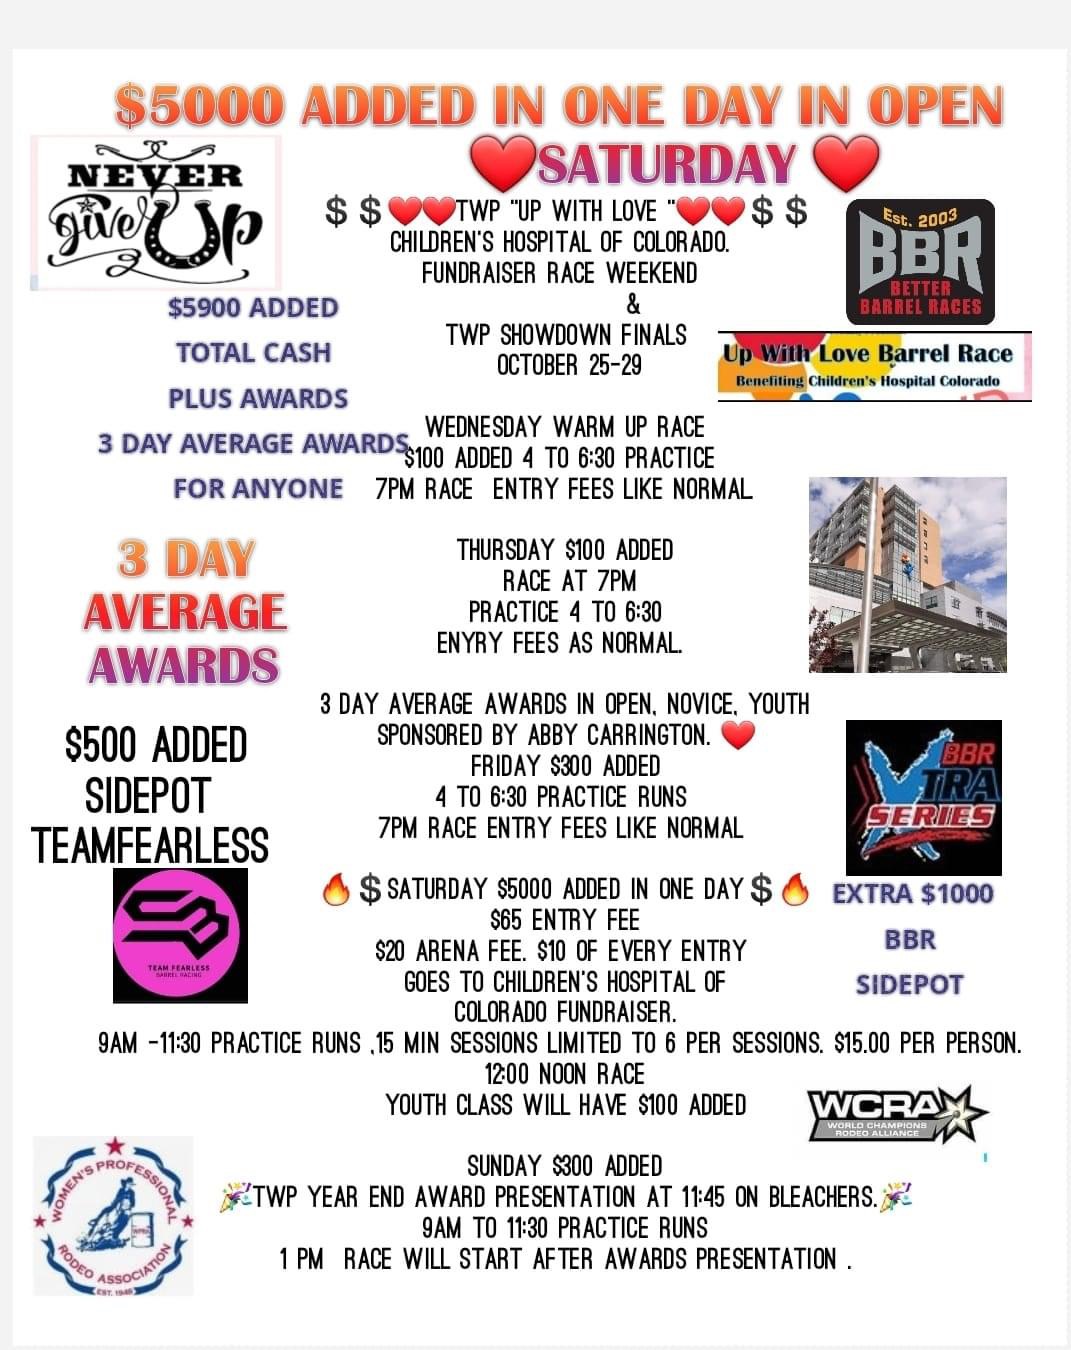 TMW Up With Love Childrens Hospital Fundraiser Race